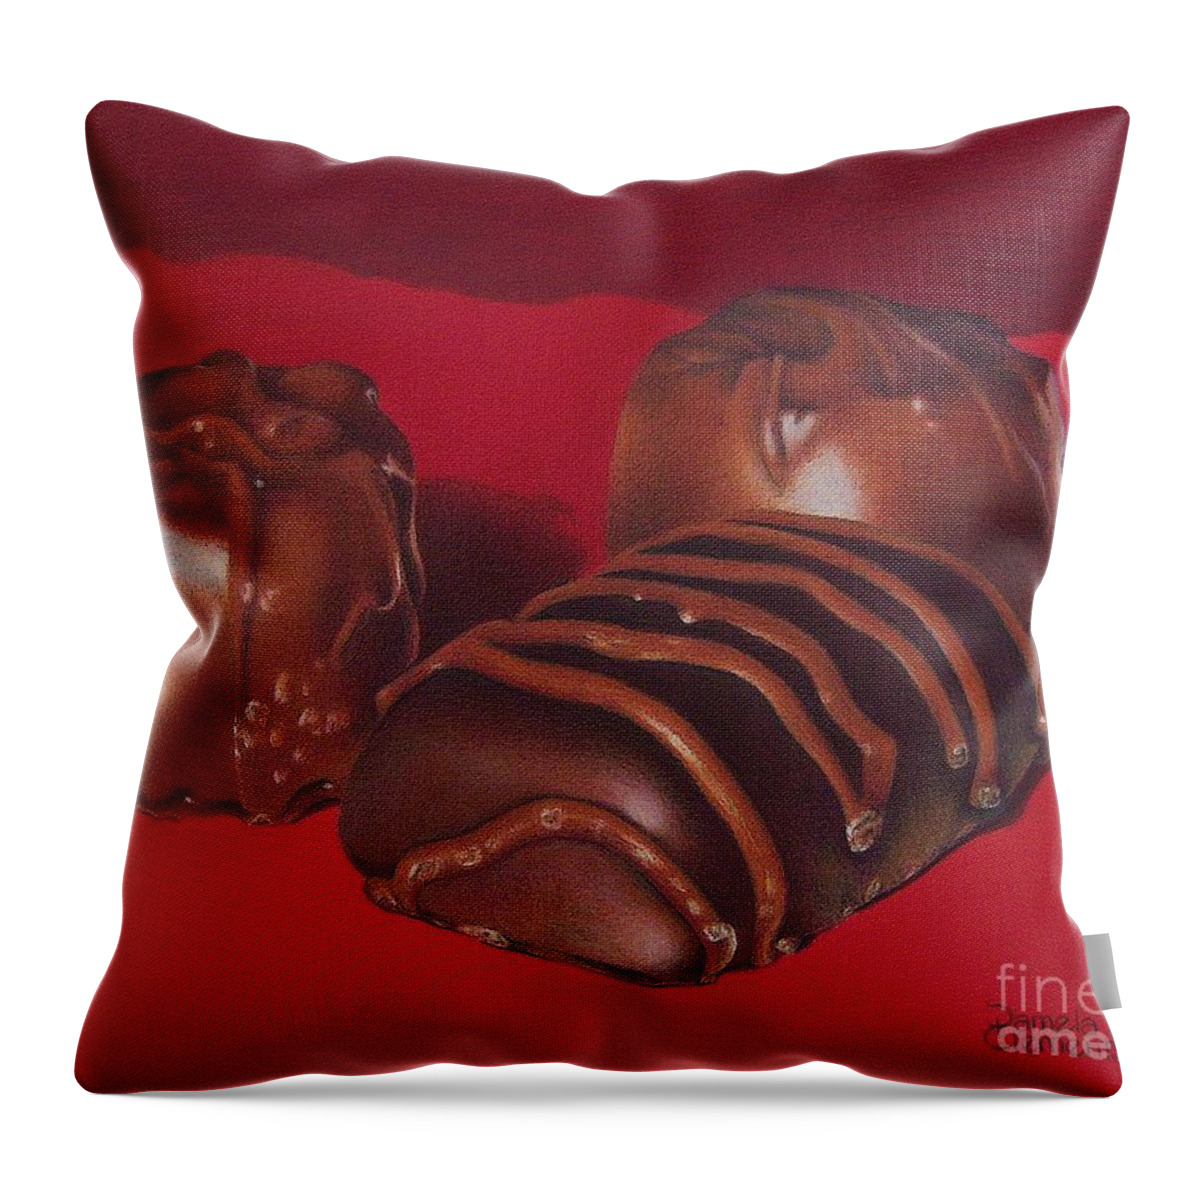 Chocolate Throw Pillow featuring the painting Three Sirens by Pamela Clements